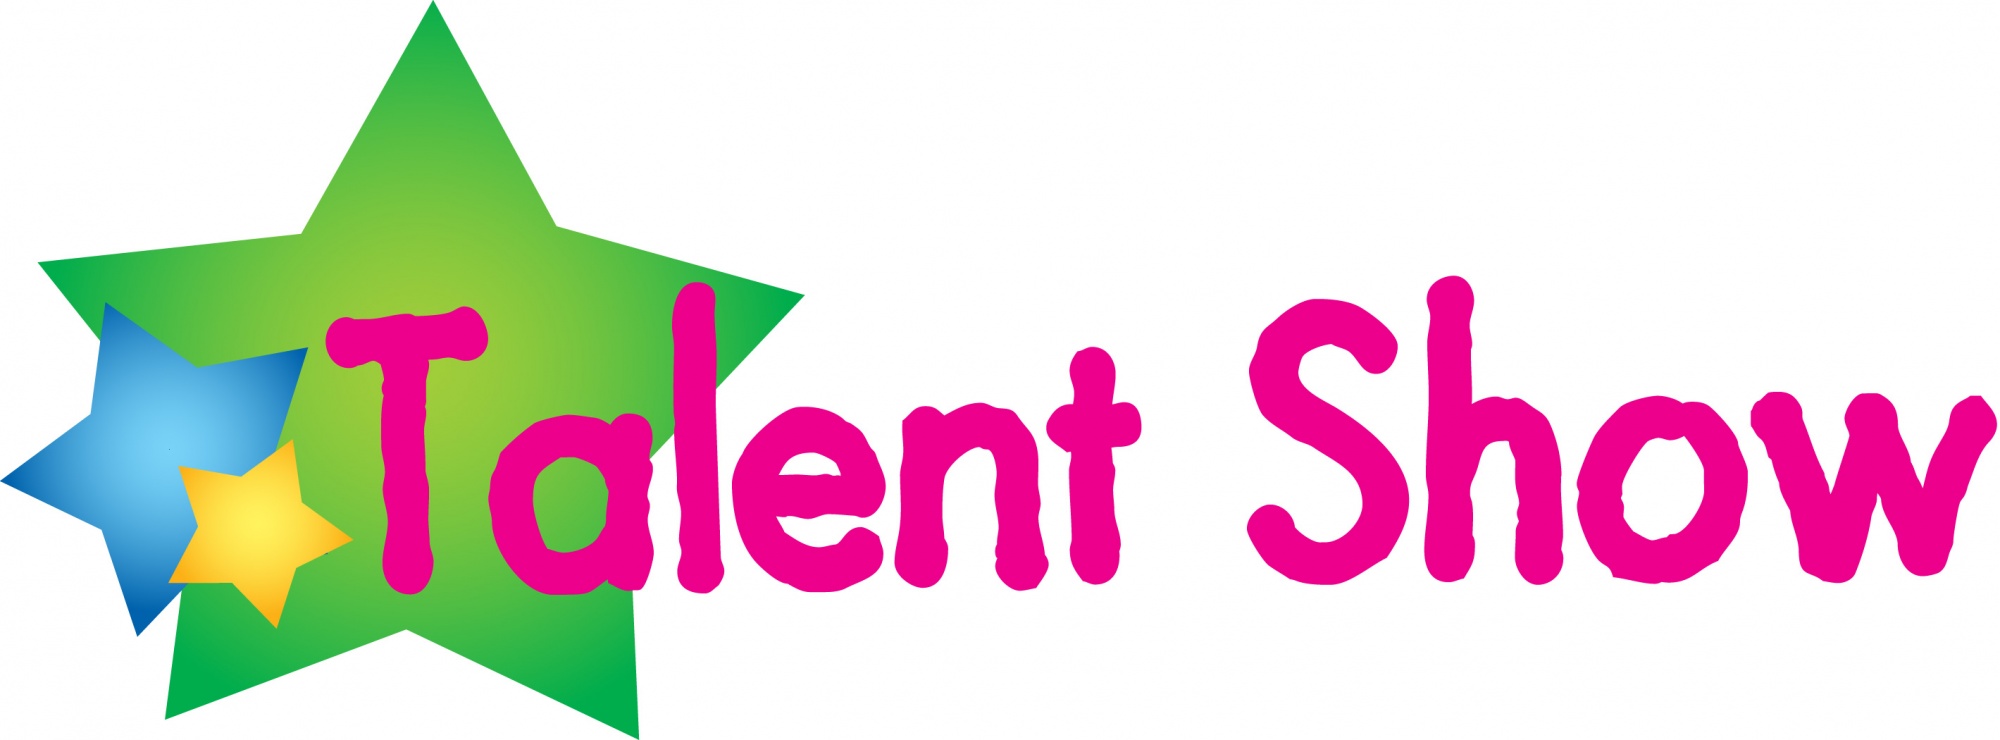 talent-show-poster-cliparts-co